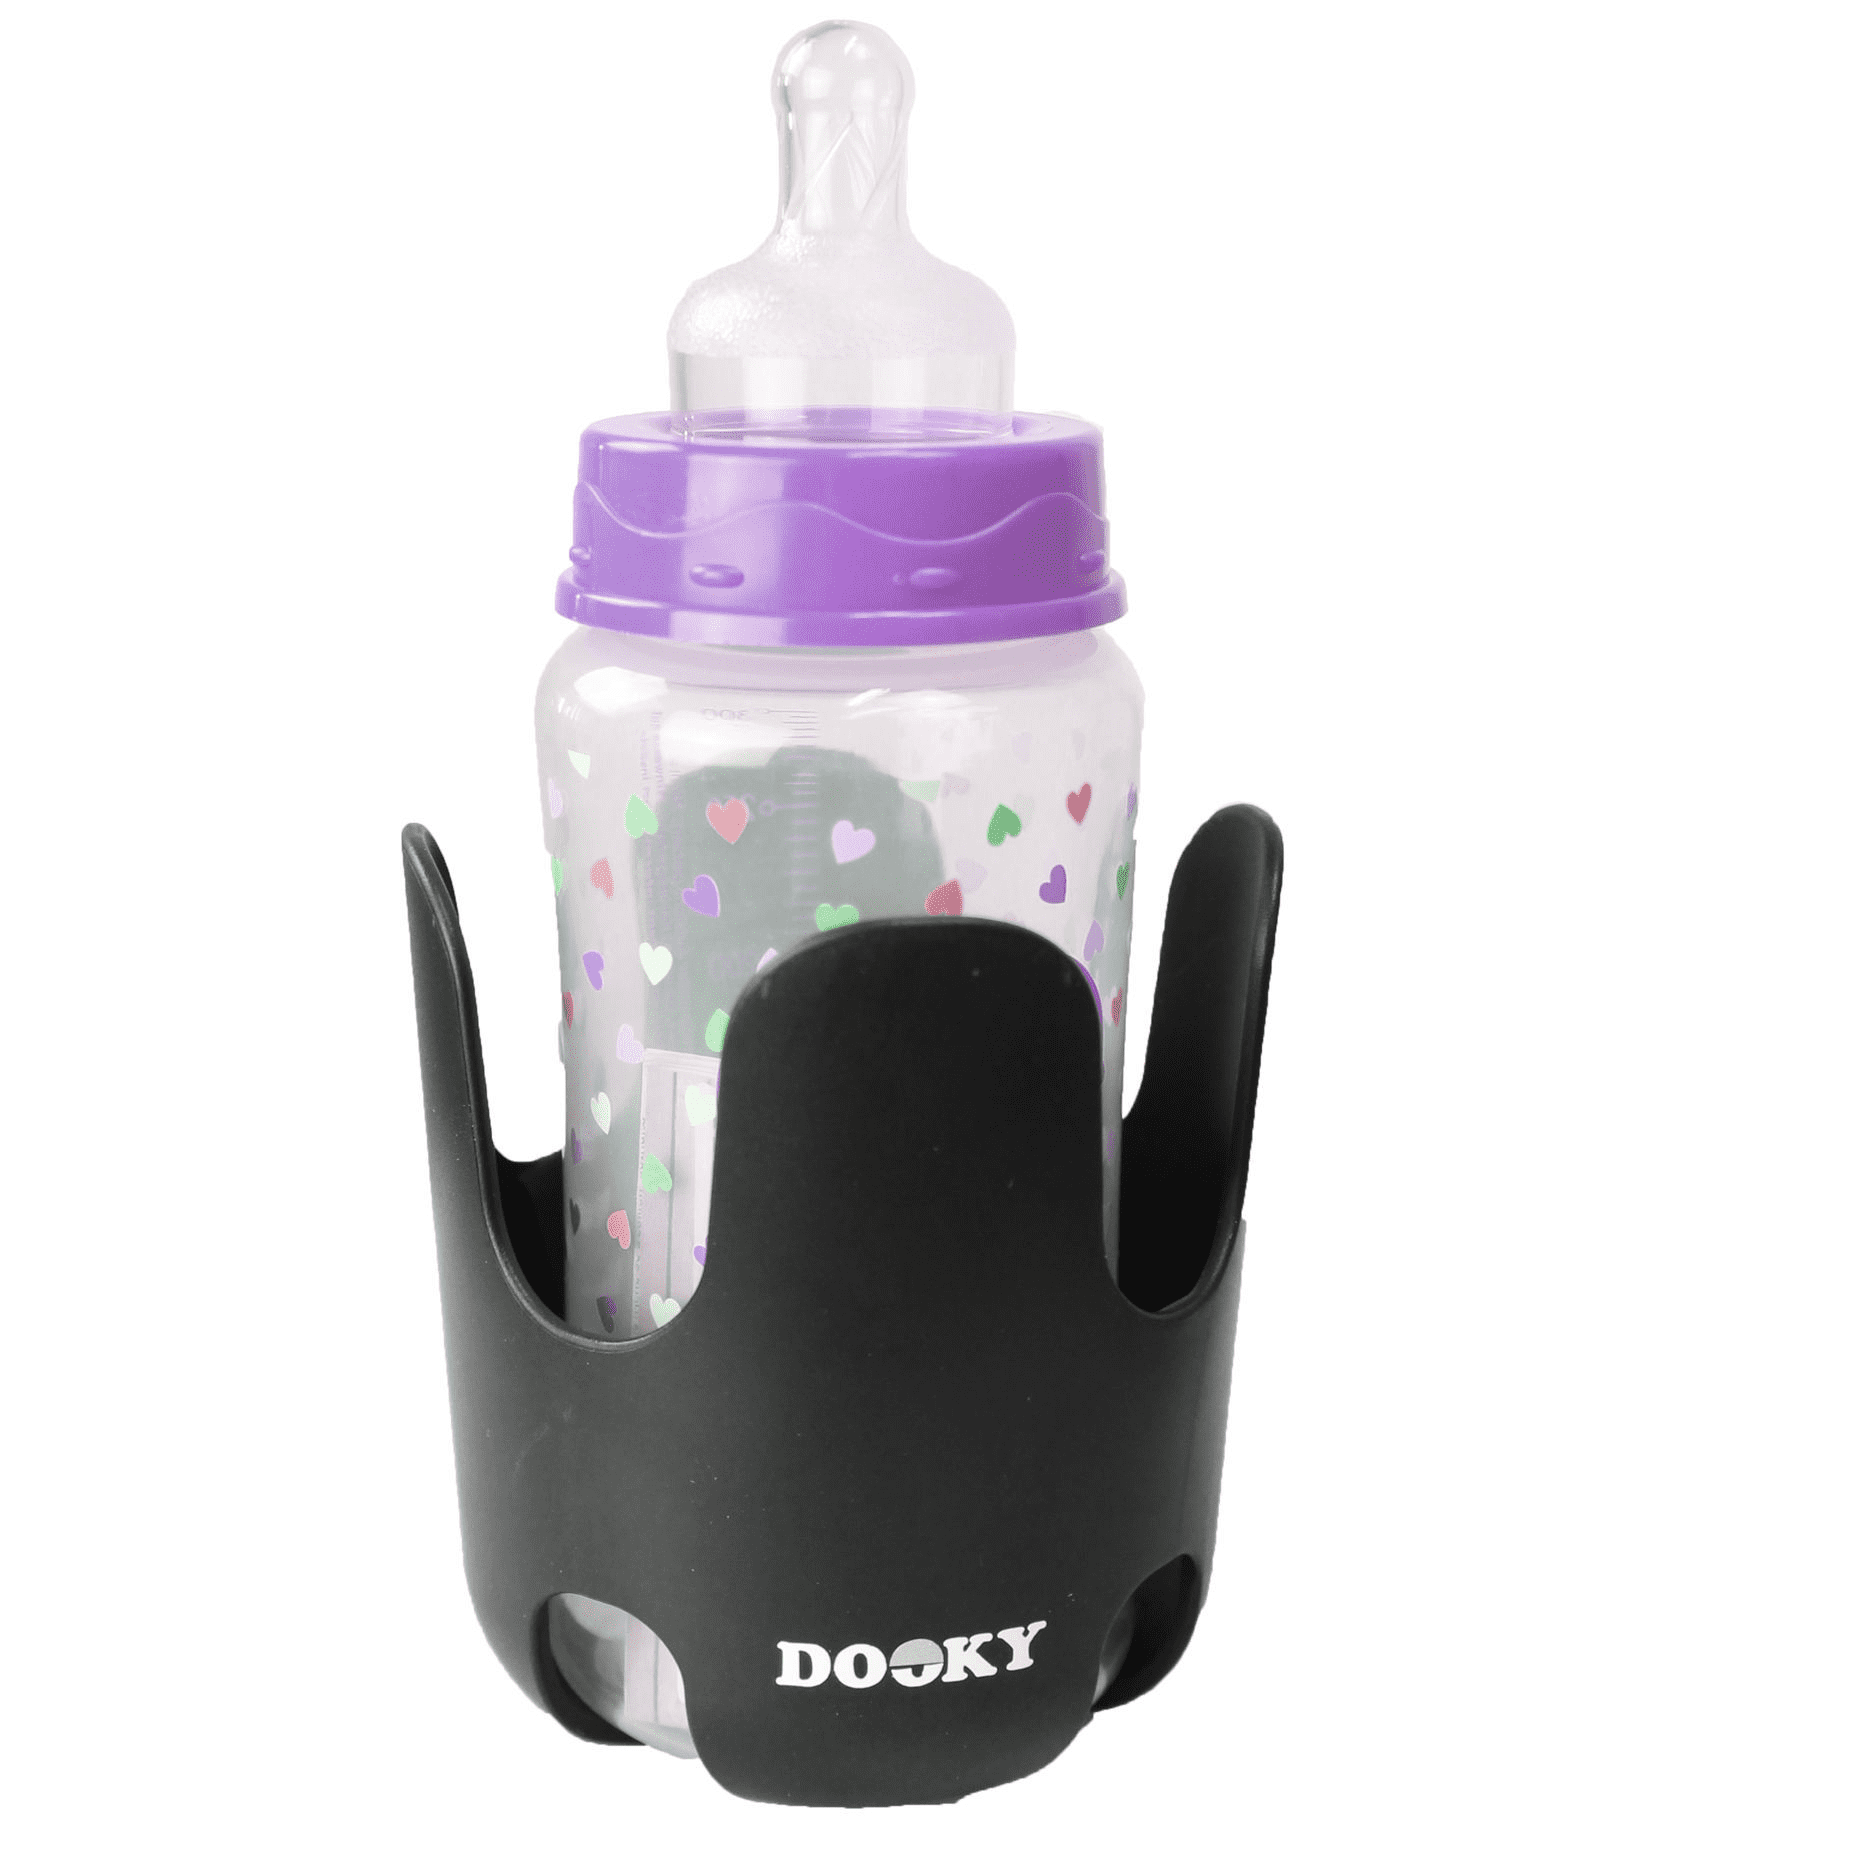 Hippychick buggy accessories Dooky Universal Stroller Cup Holder DOOKY128250